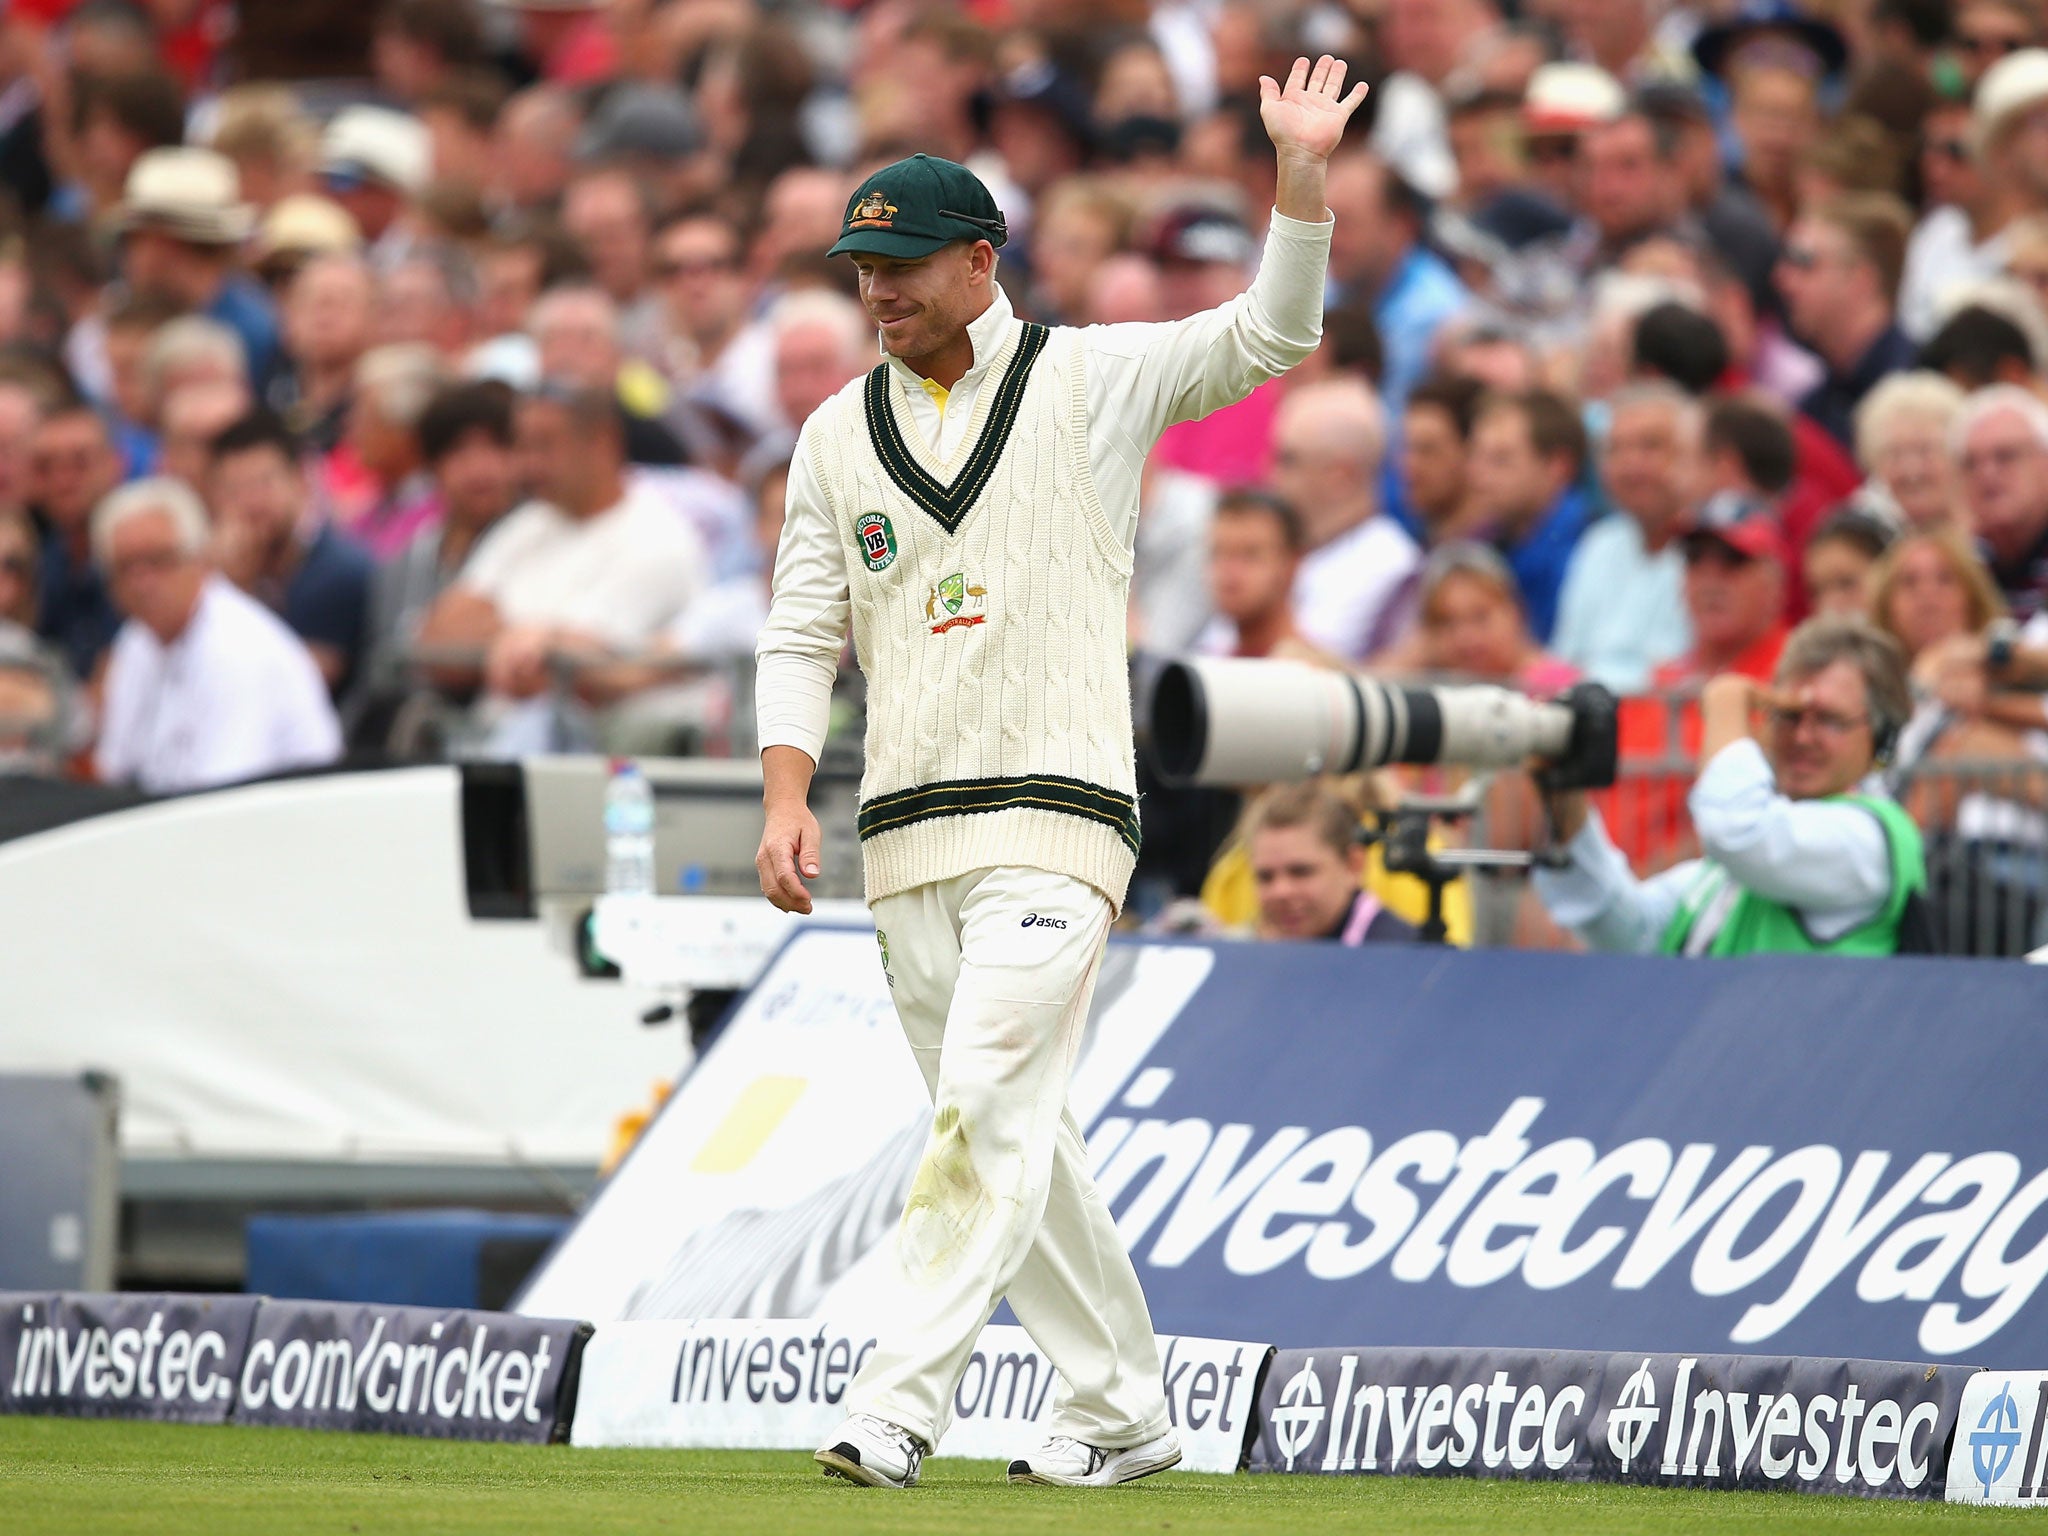 David Warner good-naturedly acknowledges the crowd's attempts to sledge him at Old Trafford